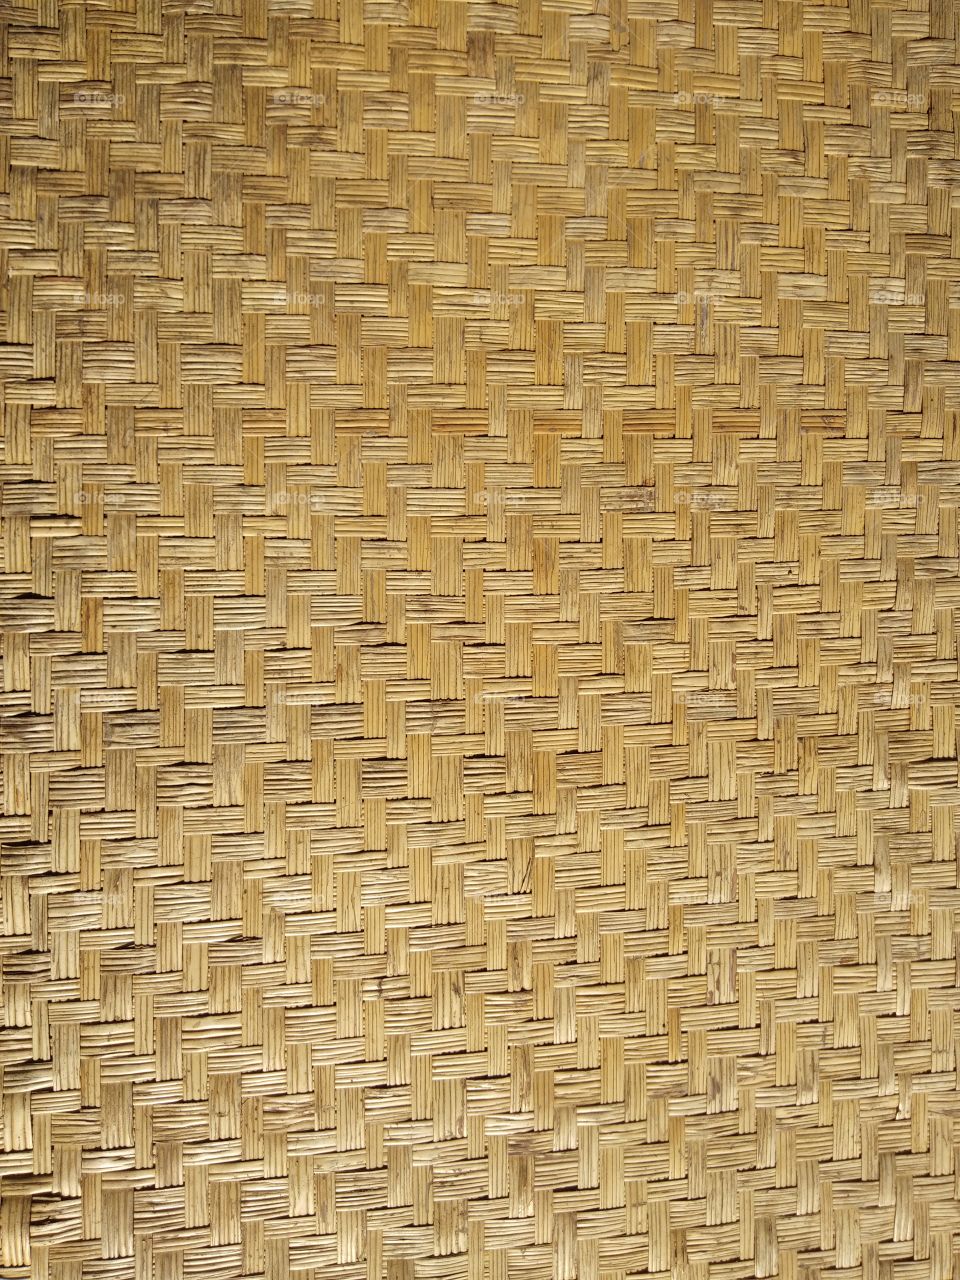 The pattern of weaved bamboo mat.